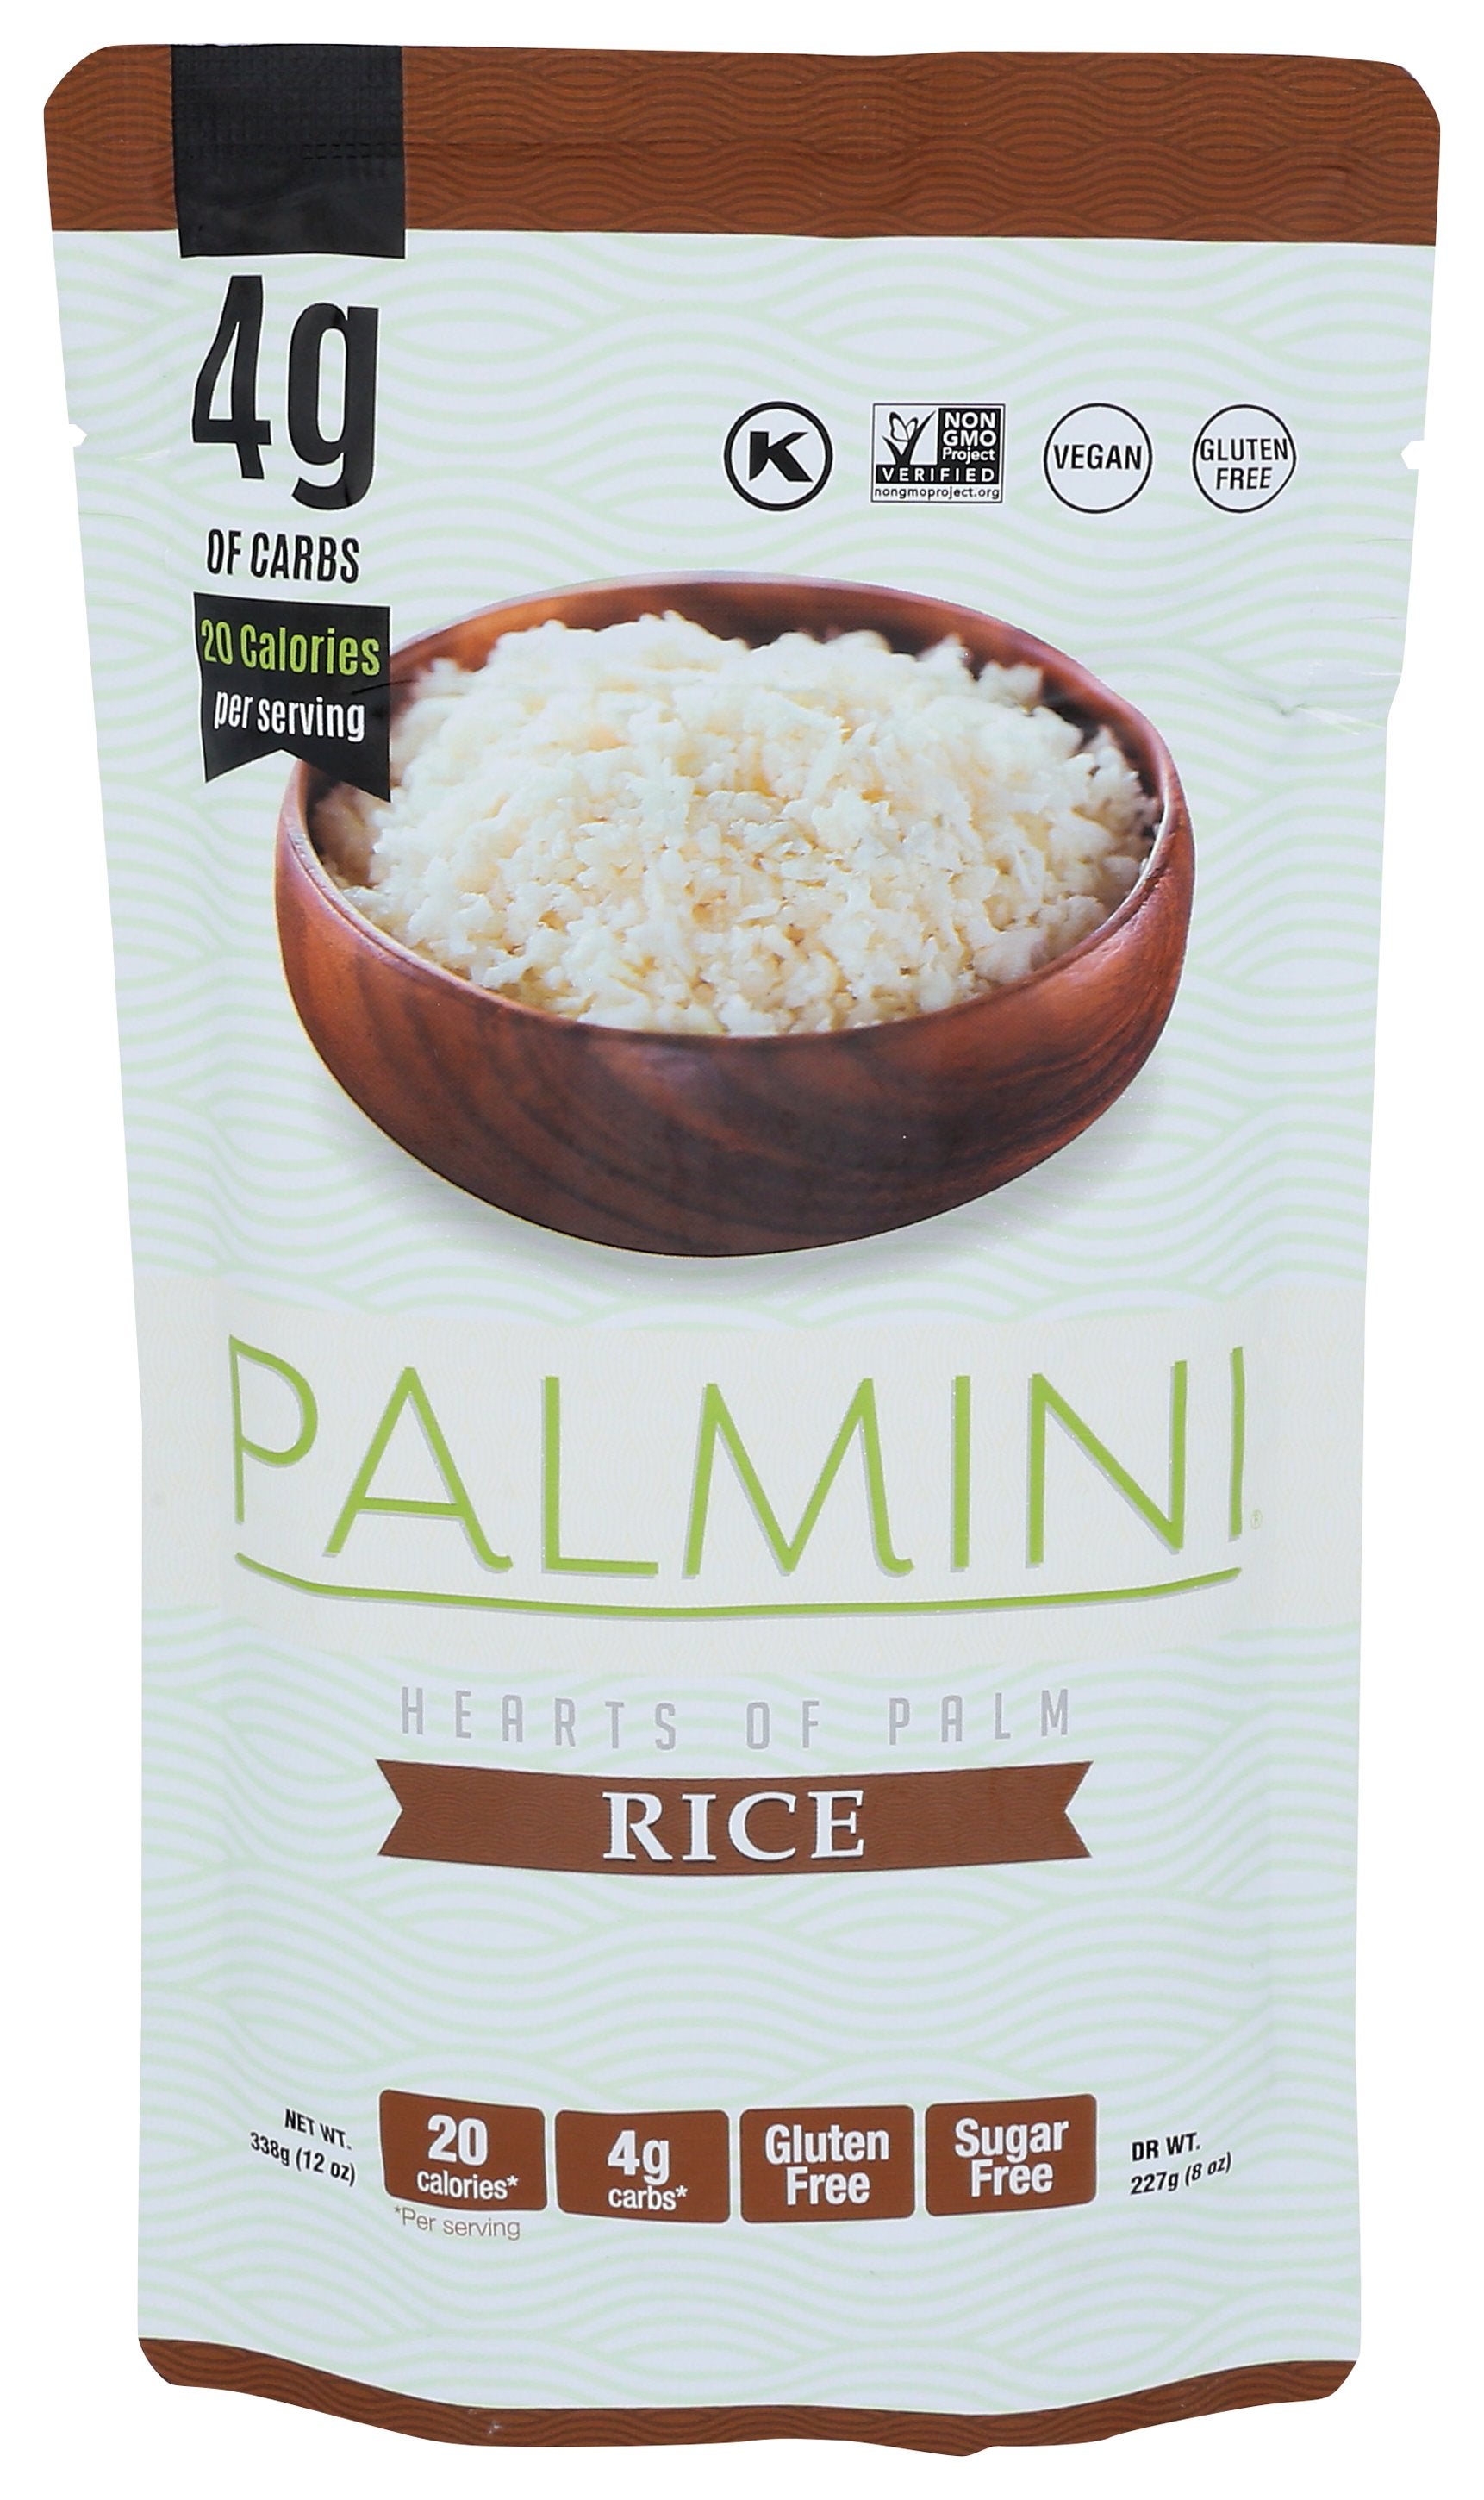 PALMINI RICE HEARTS OF PALM POUCH - Case of 6